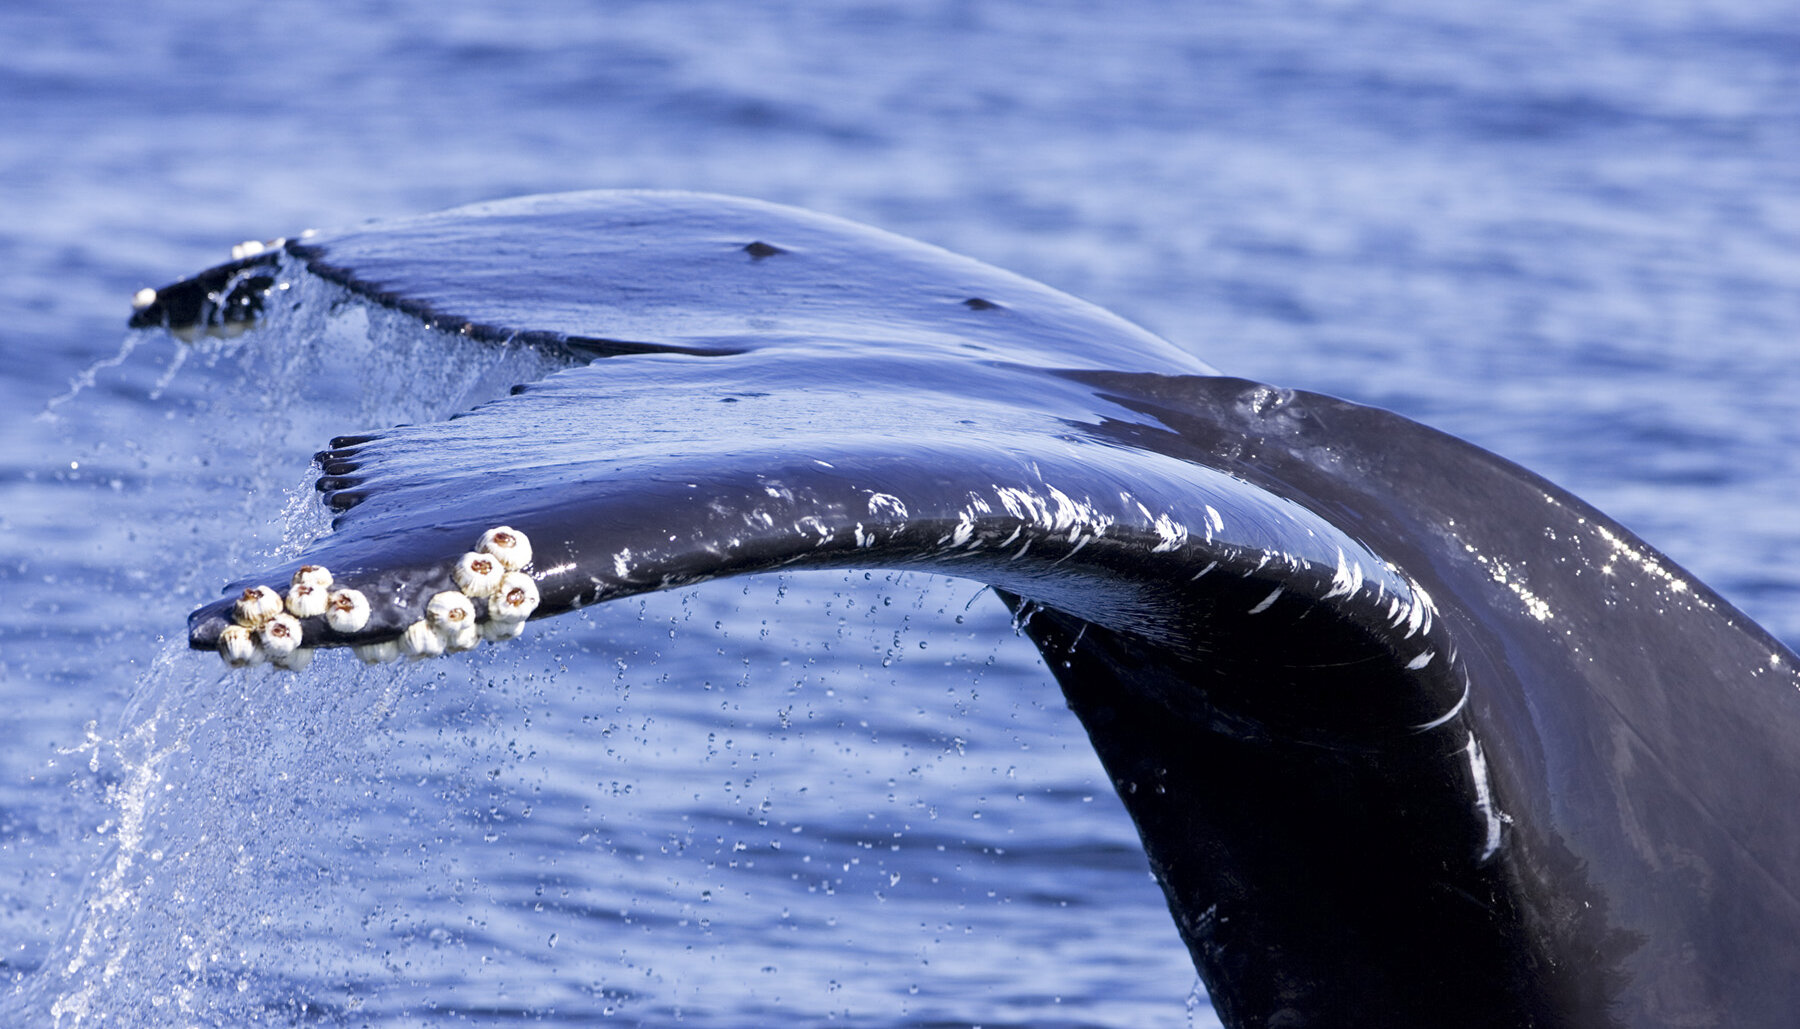 Tail of a whale coming out of the ocean with barnacles on it